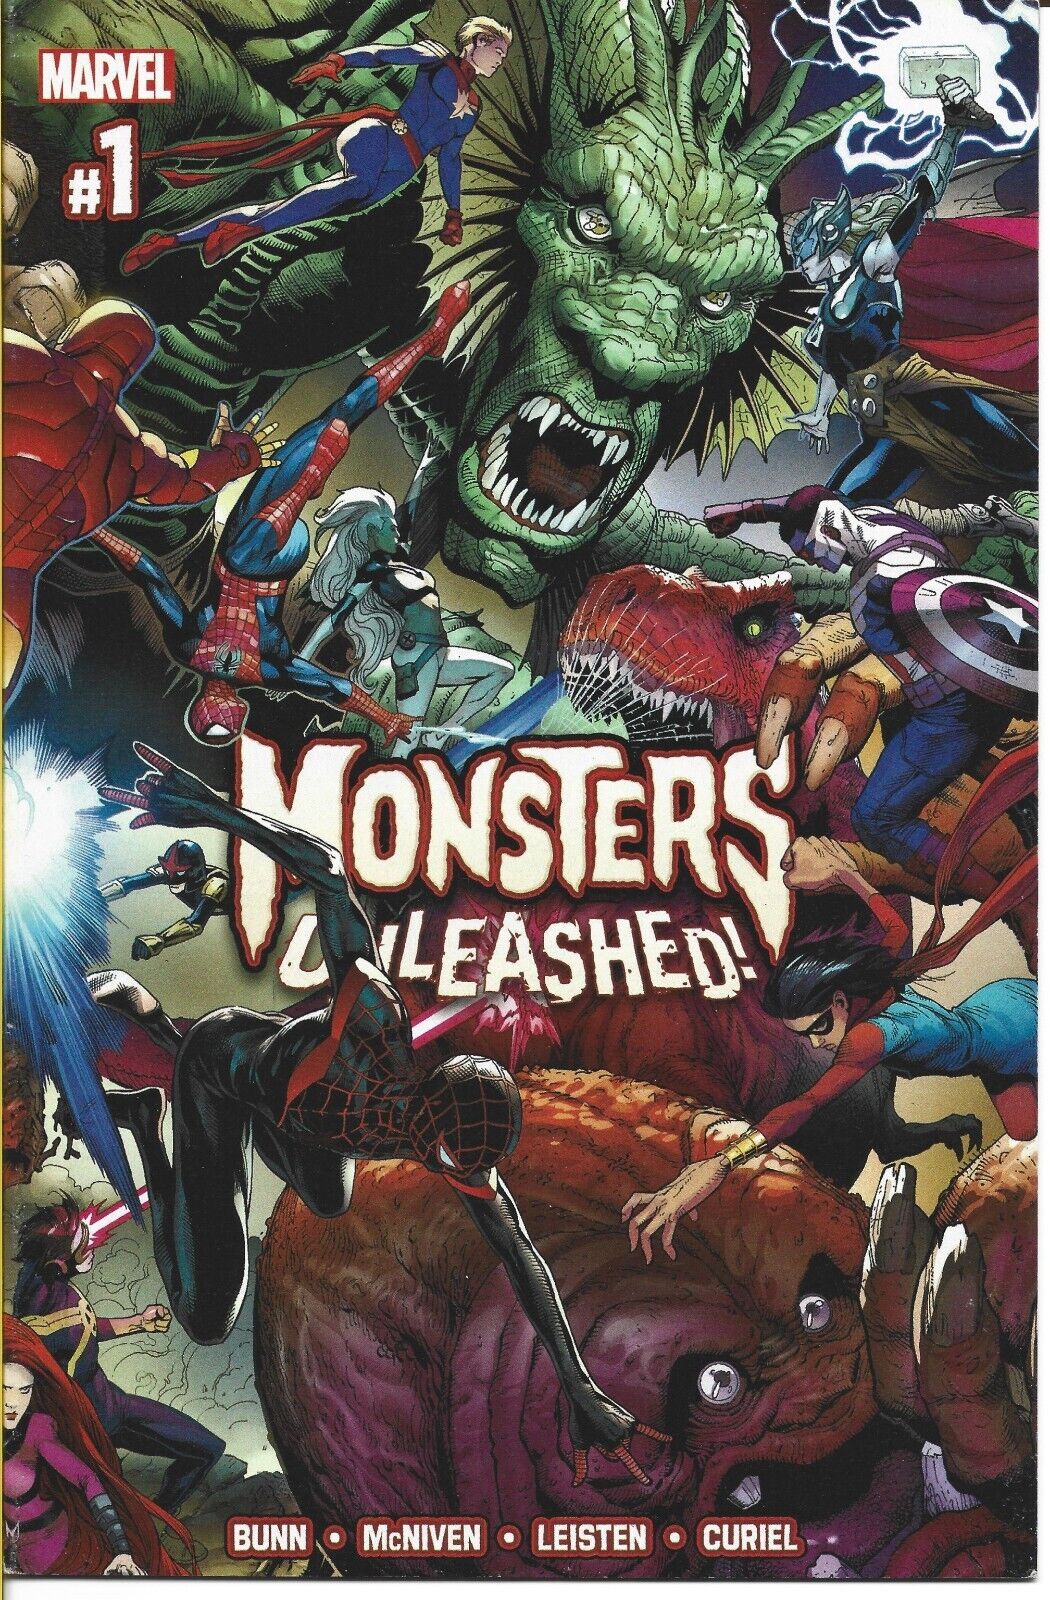 MONSTERS UNLEASHED #1 MARVEL COMICS 2017 BAGGED AND BOARDED